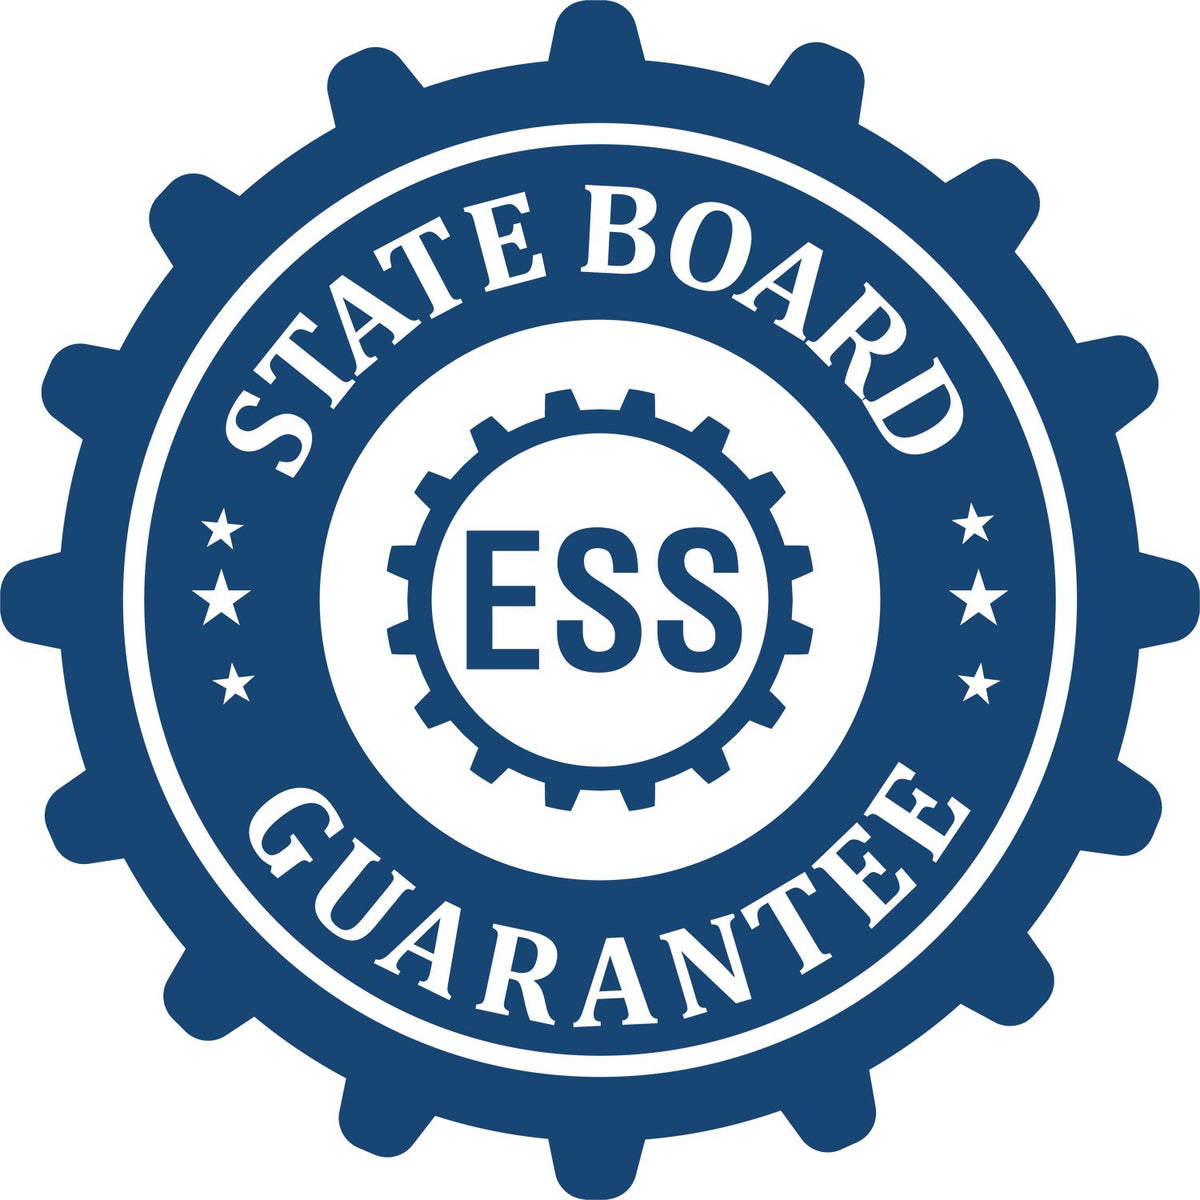 An emblem in a gear shape illustrating a state board guarantee for the Rhode Island Landscape Architectural Seal Stamp product.